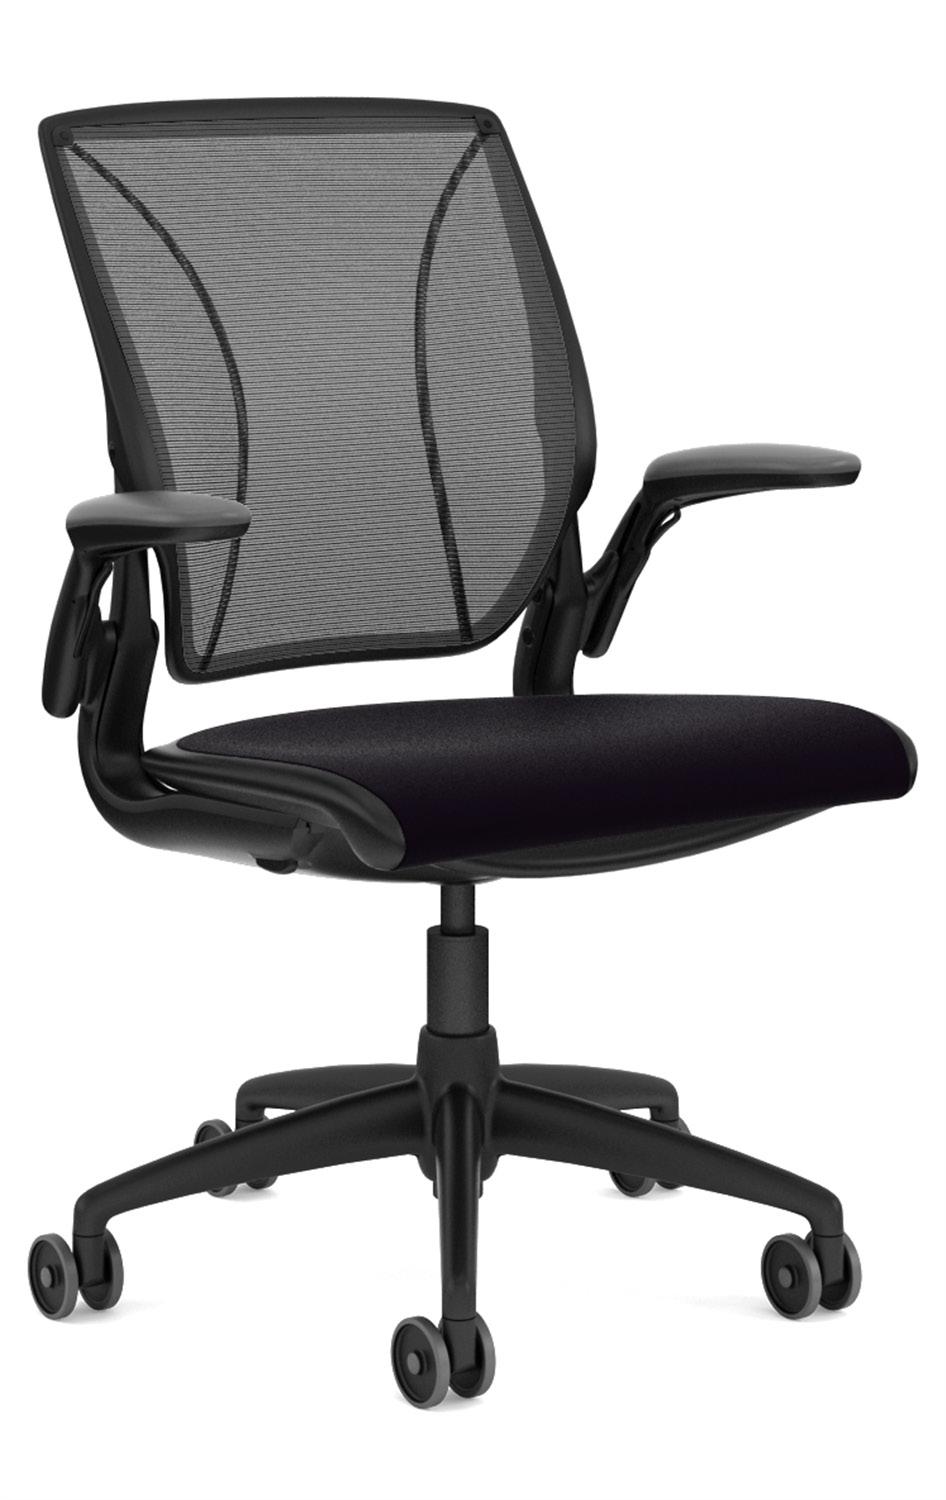 www.humanscale.